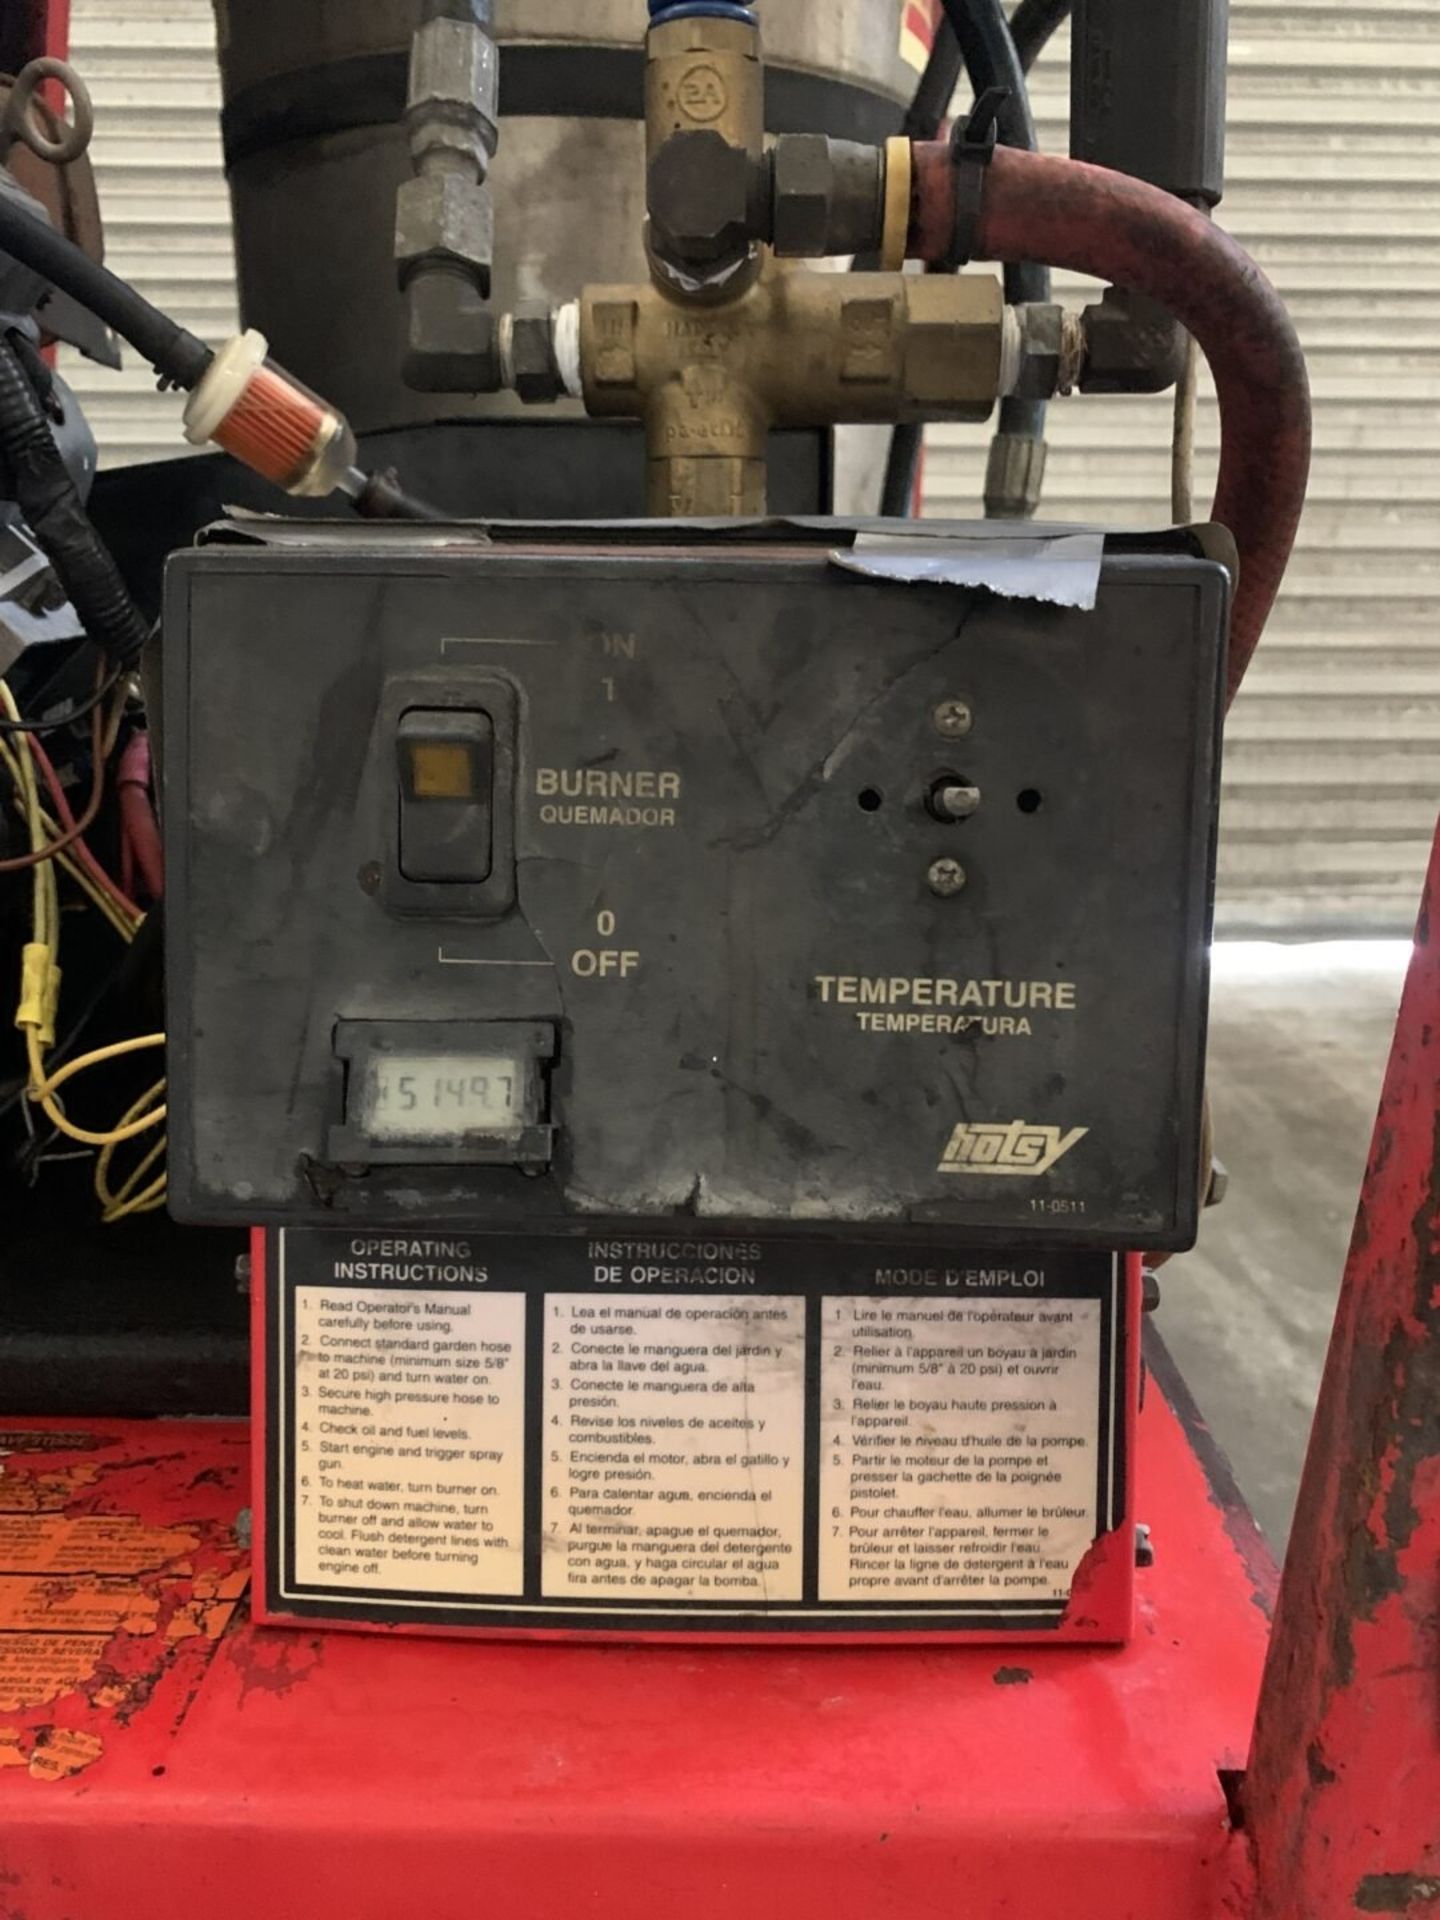 Hotsy 1200 Series Oil-Fired and Gasoline Powered/Belt Drive Heated Pressure Washer - Image 2 of 13